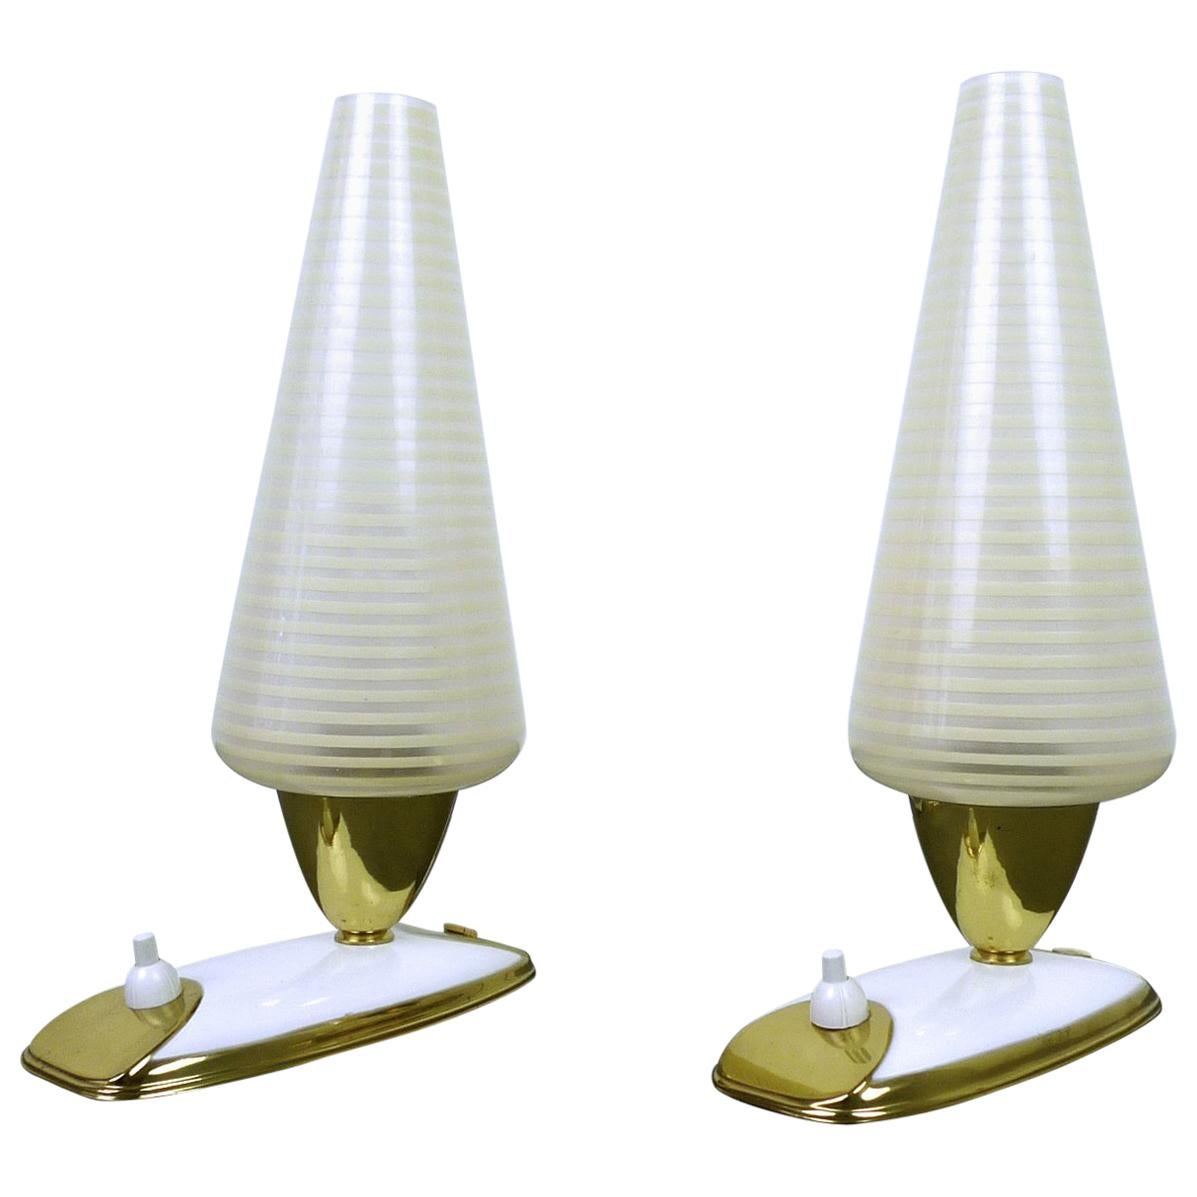 Pair of Table Lamps with Striped Glass Diffusers, Germany, 1950s For Sale